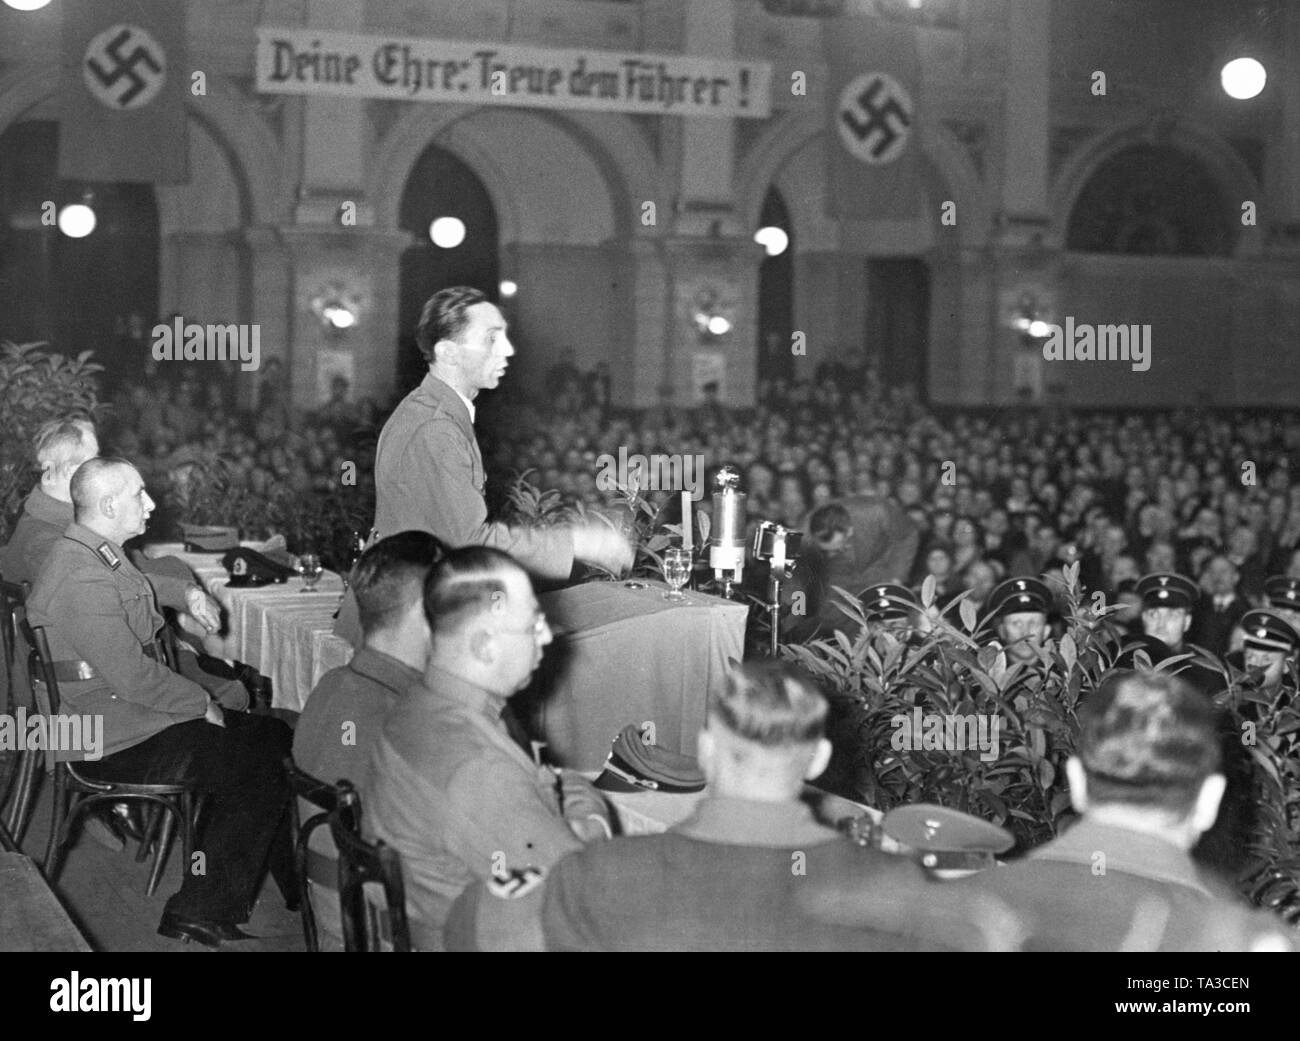 Joseph Goebbels speaks at a National Socialist demonstration. In the background, a banner 'Deine Ehre: Treue dem Fuehrer!' ('Your Honor: Be Faithful to the Leader!'), a demand for loyalty to Adolf Hitler. Stock Photo